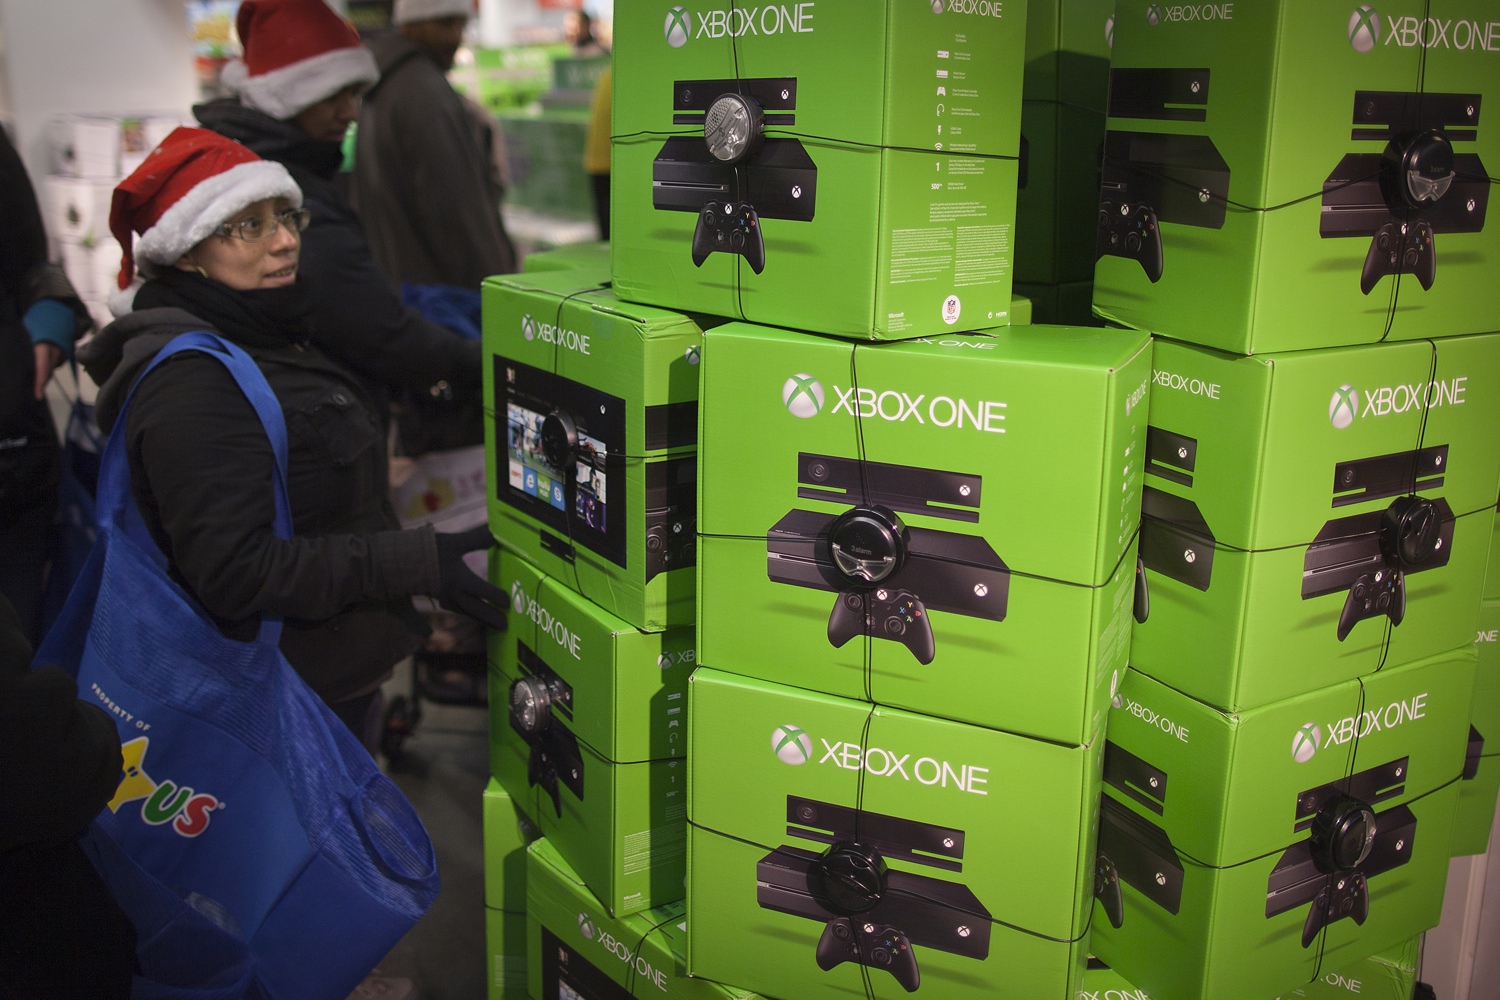 toys r us xbox one